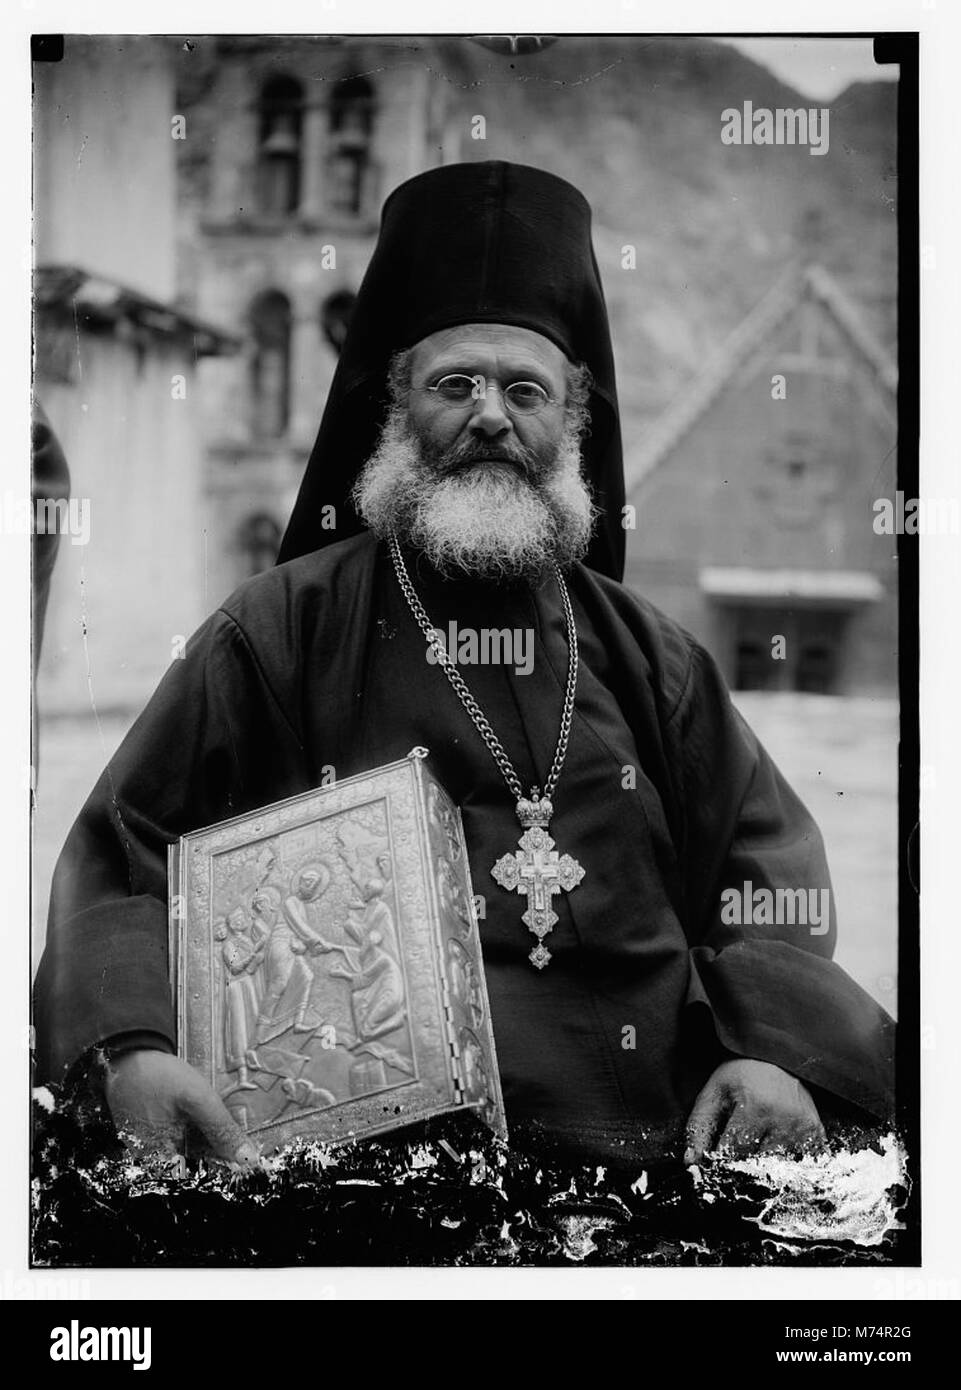 Greek Orthodox priest at St. Catherine's Monastery in the Sinai holding prized manuscript with silver cover from their library LOC matpc.09662 Stock Photo